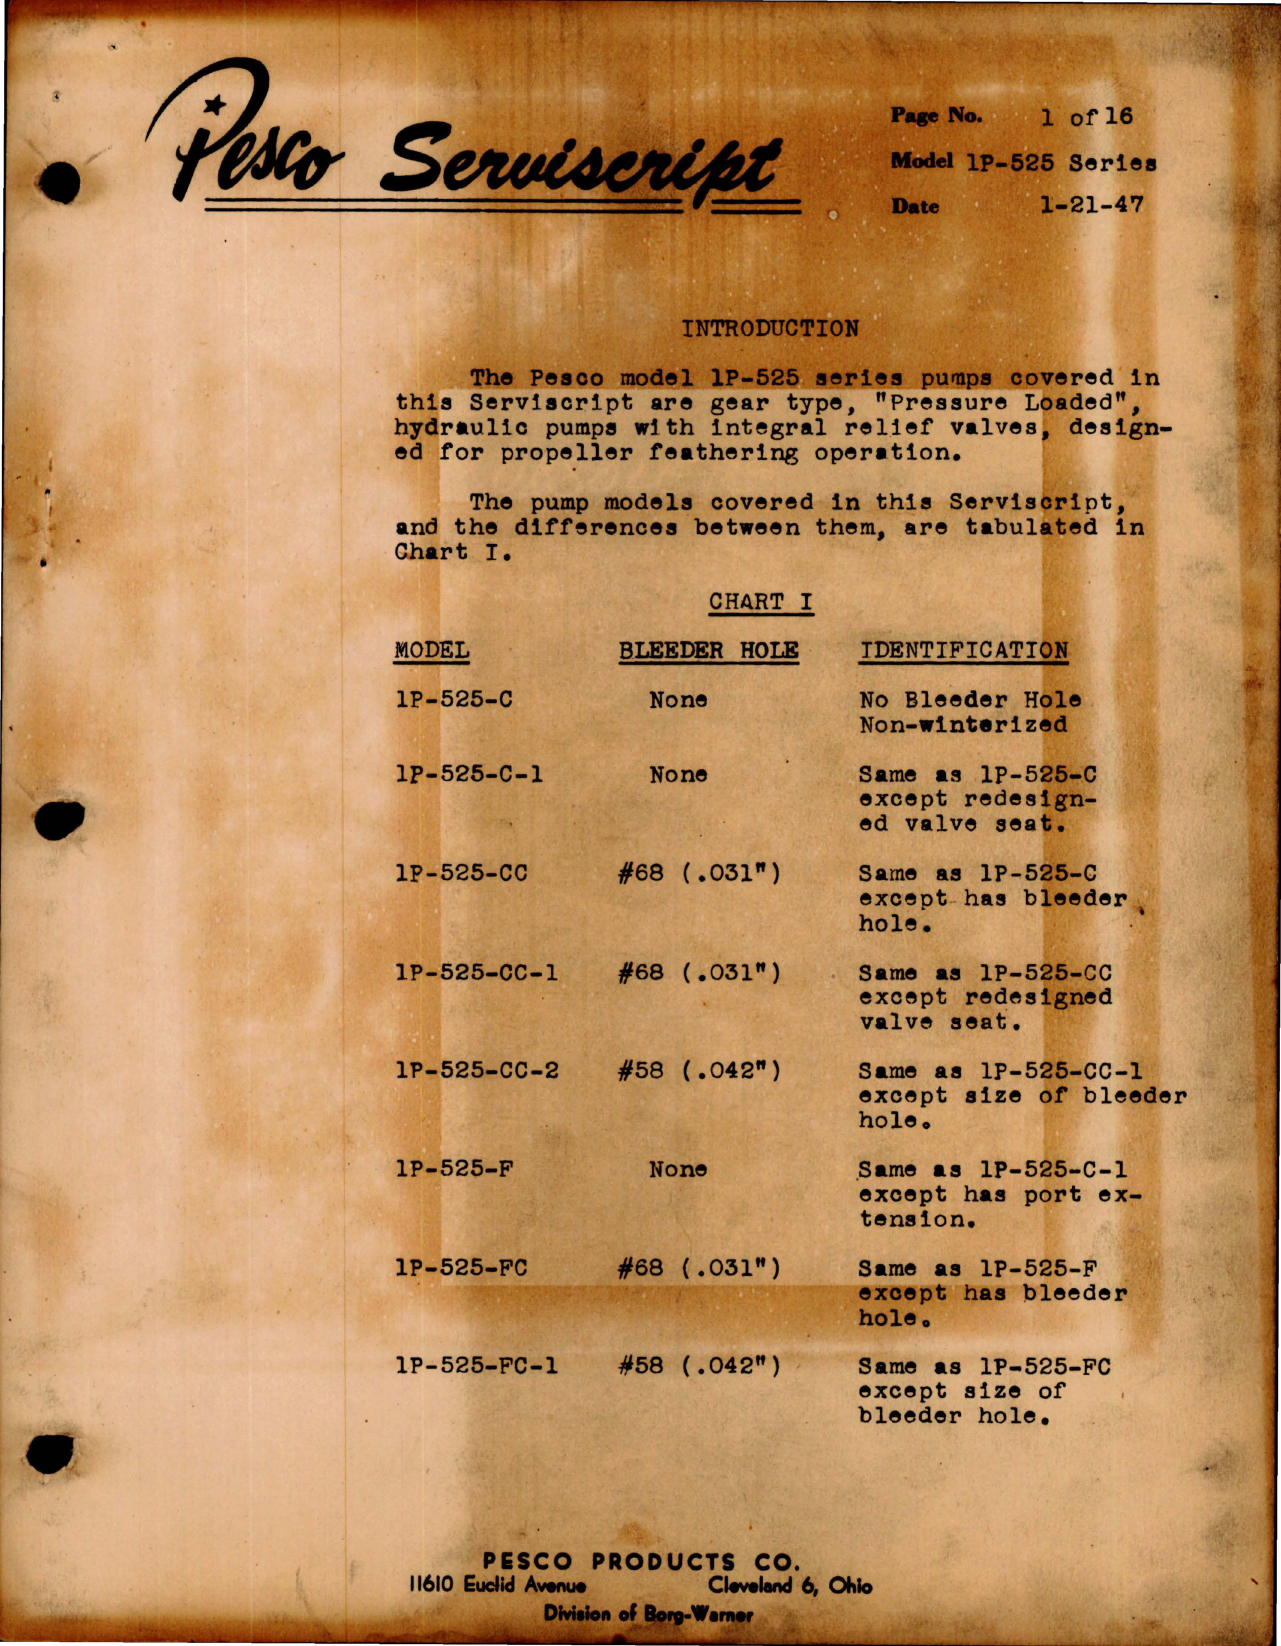 Sample page 1 from AirCorps Library document: Service and Maintenance for Pressure Loaded Hydraulic Pump - Model 1P-525 Series